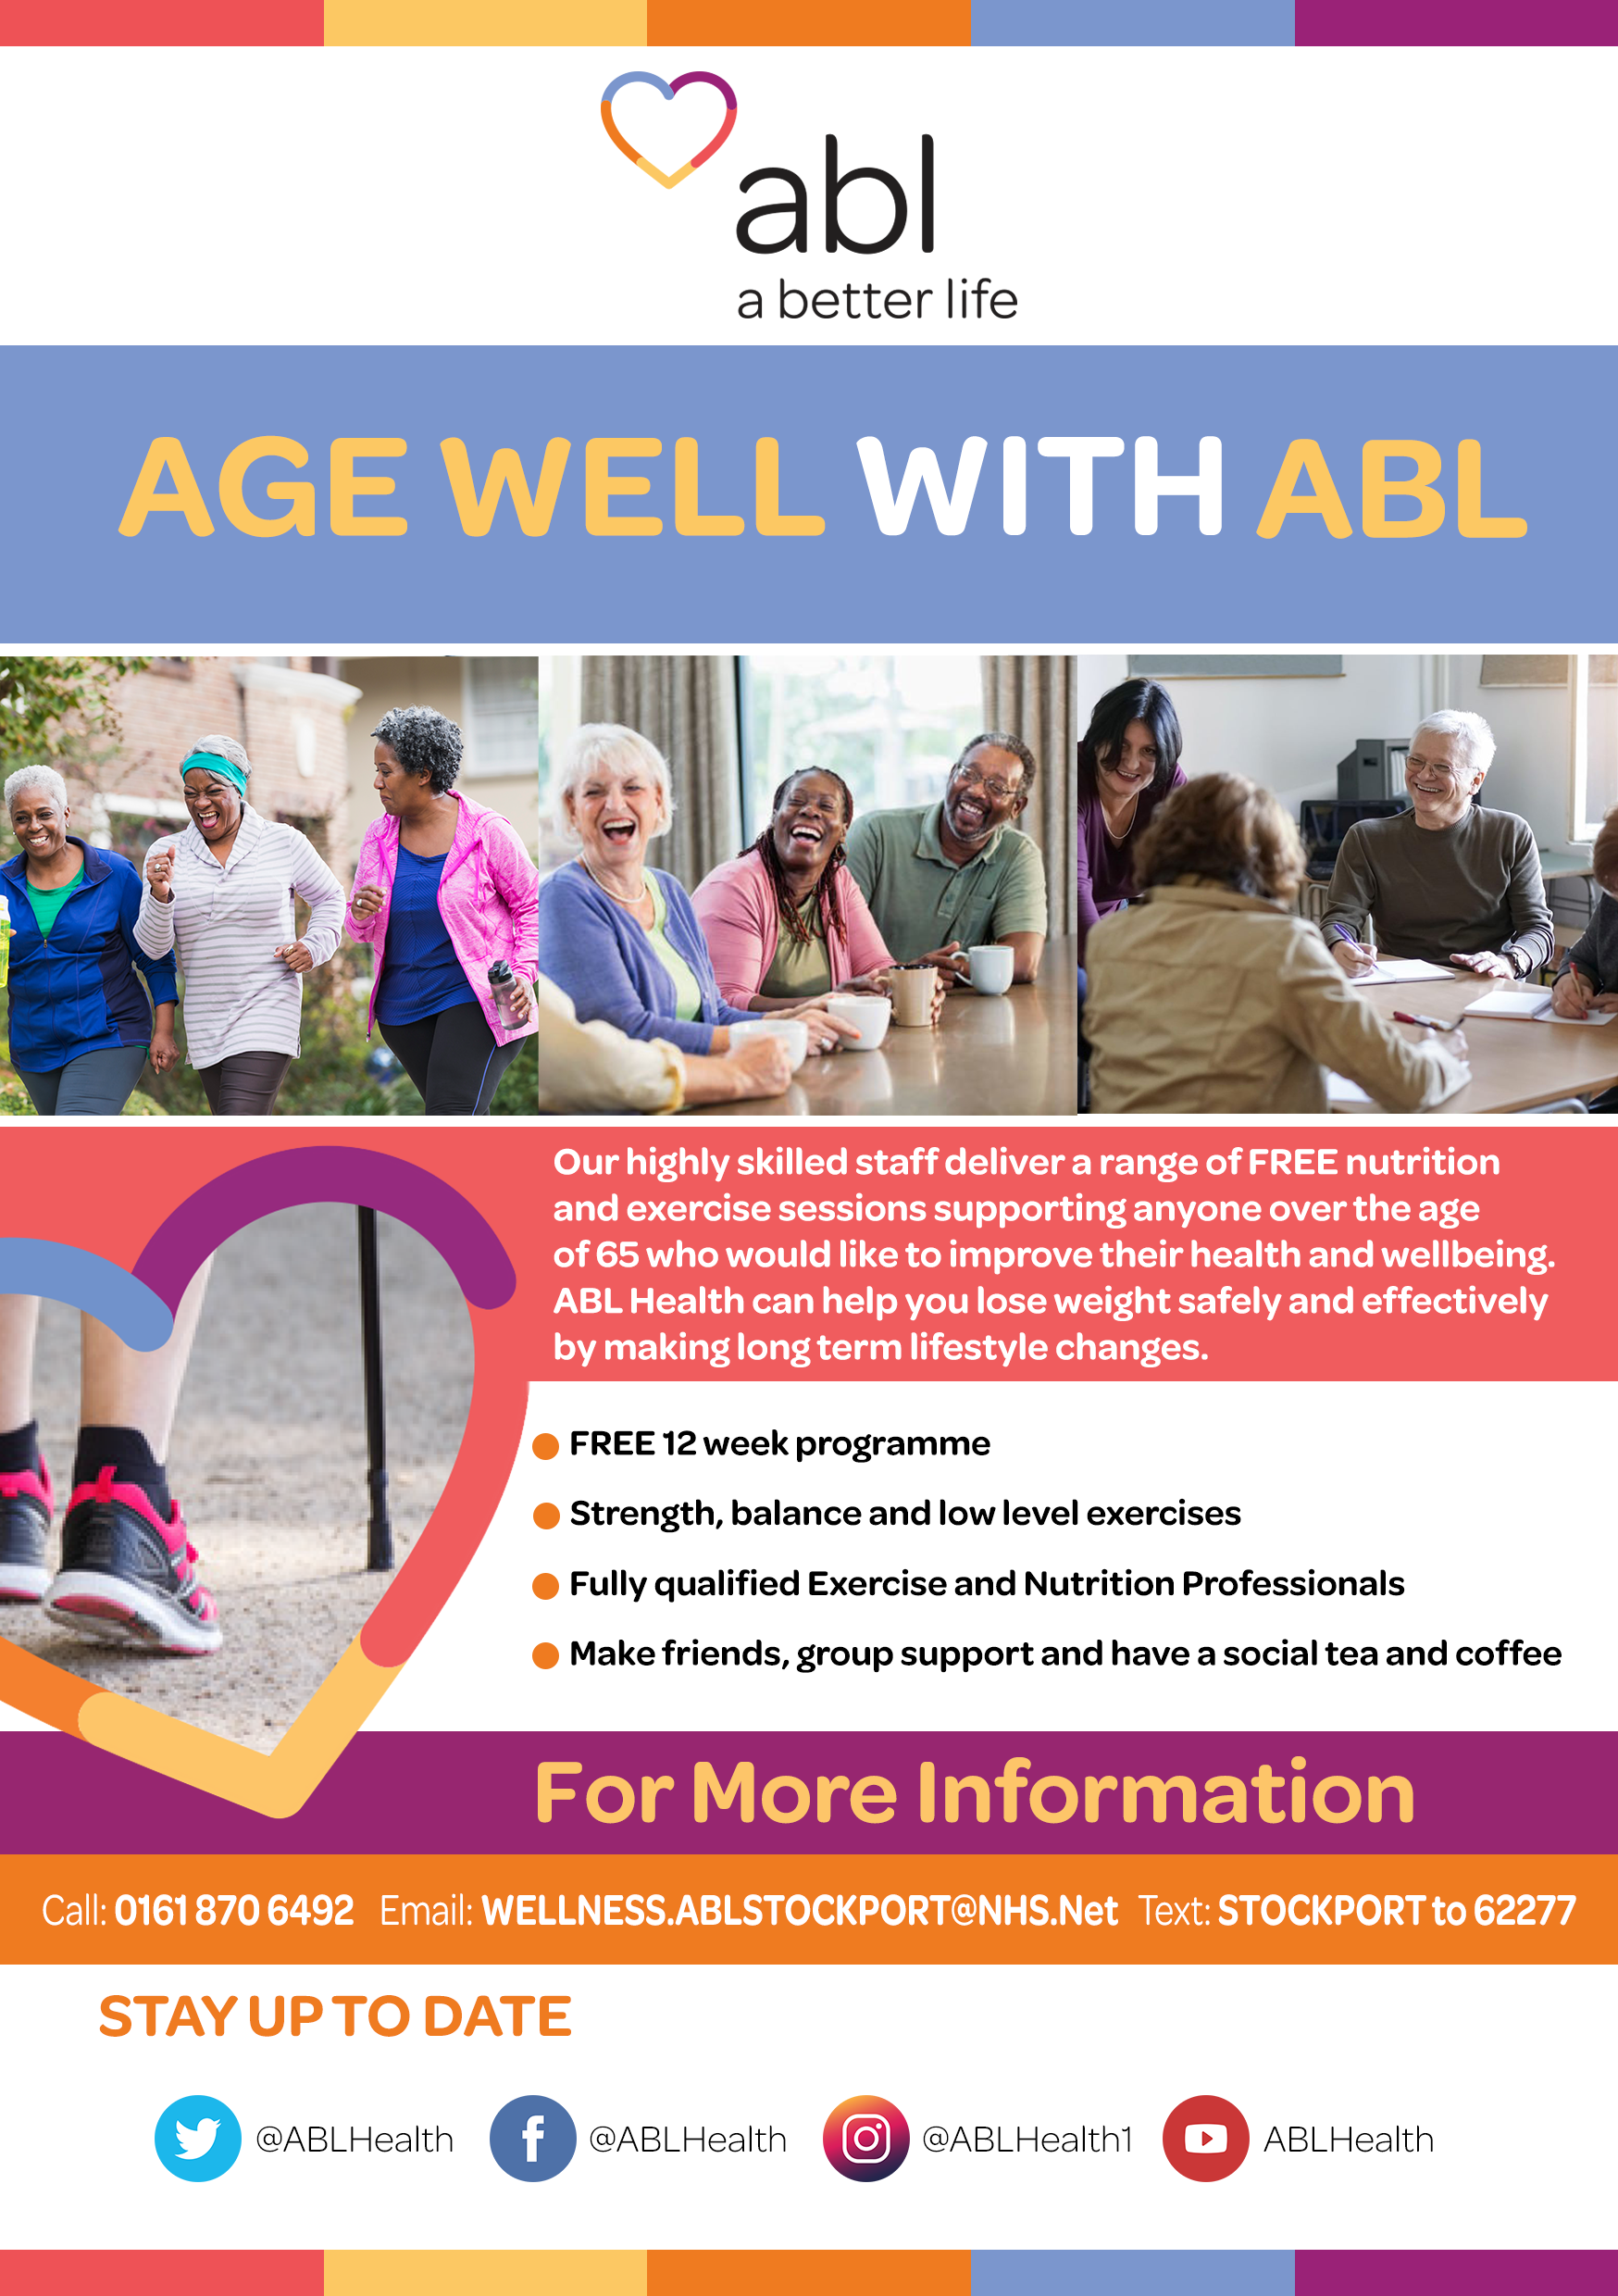 Age Well with ABL